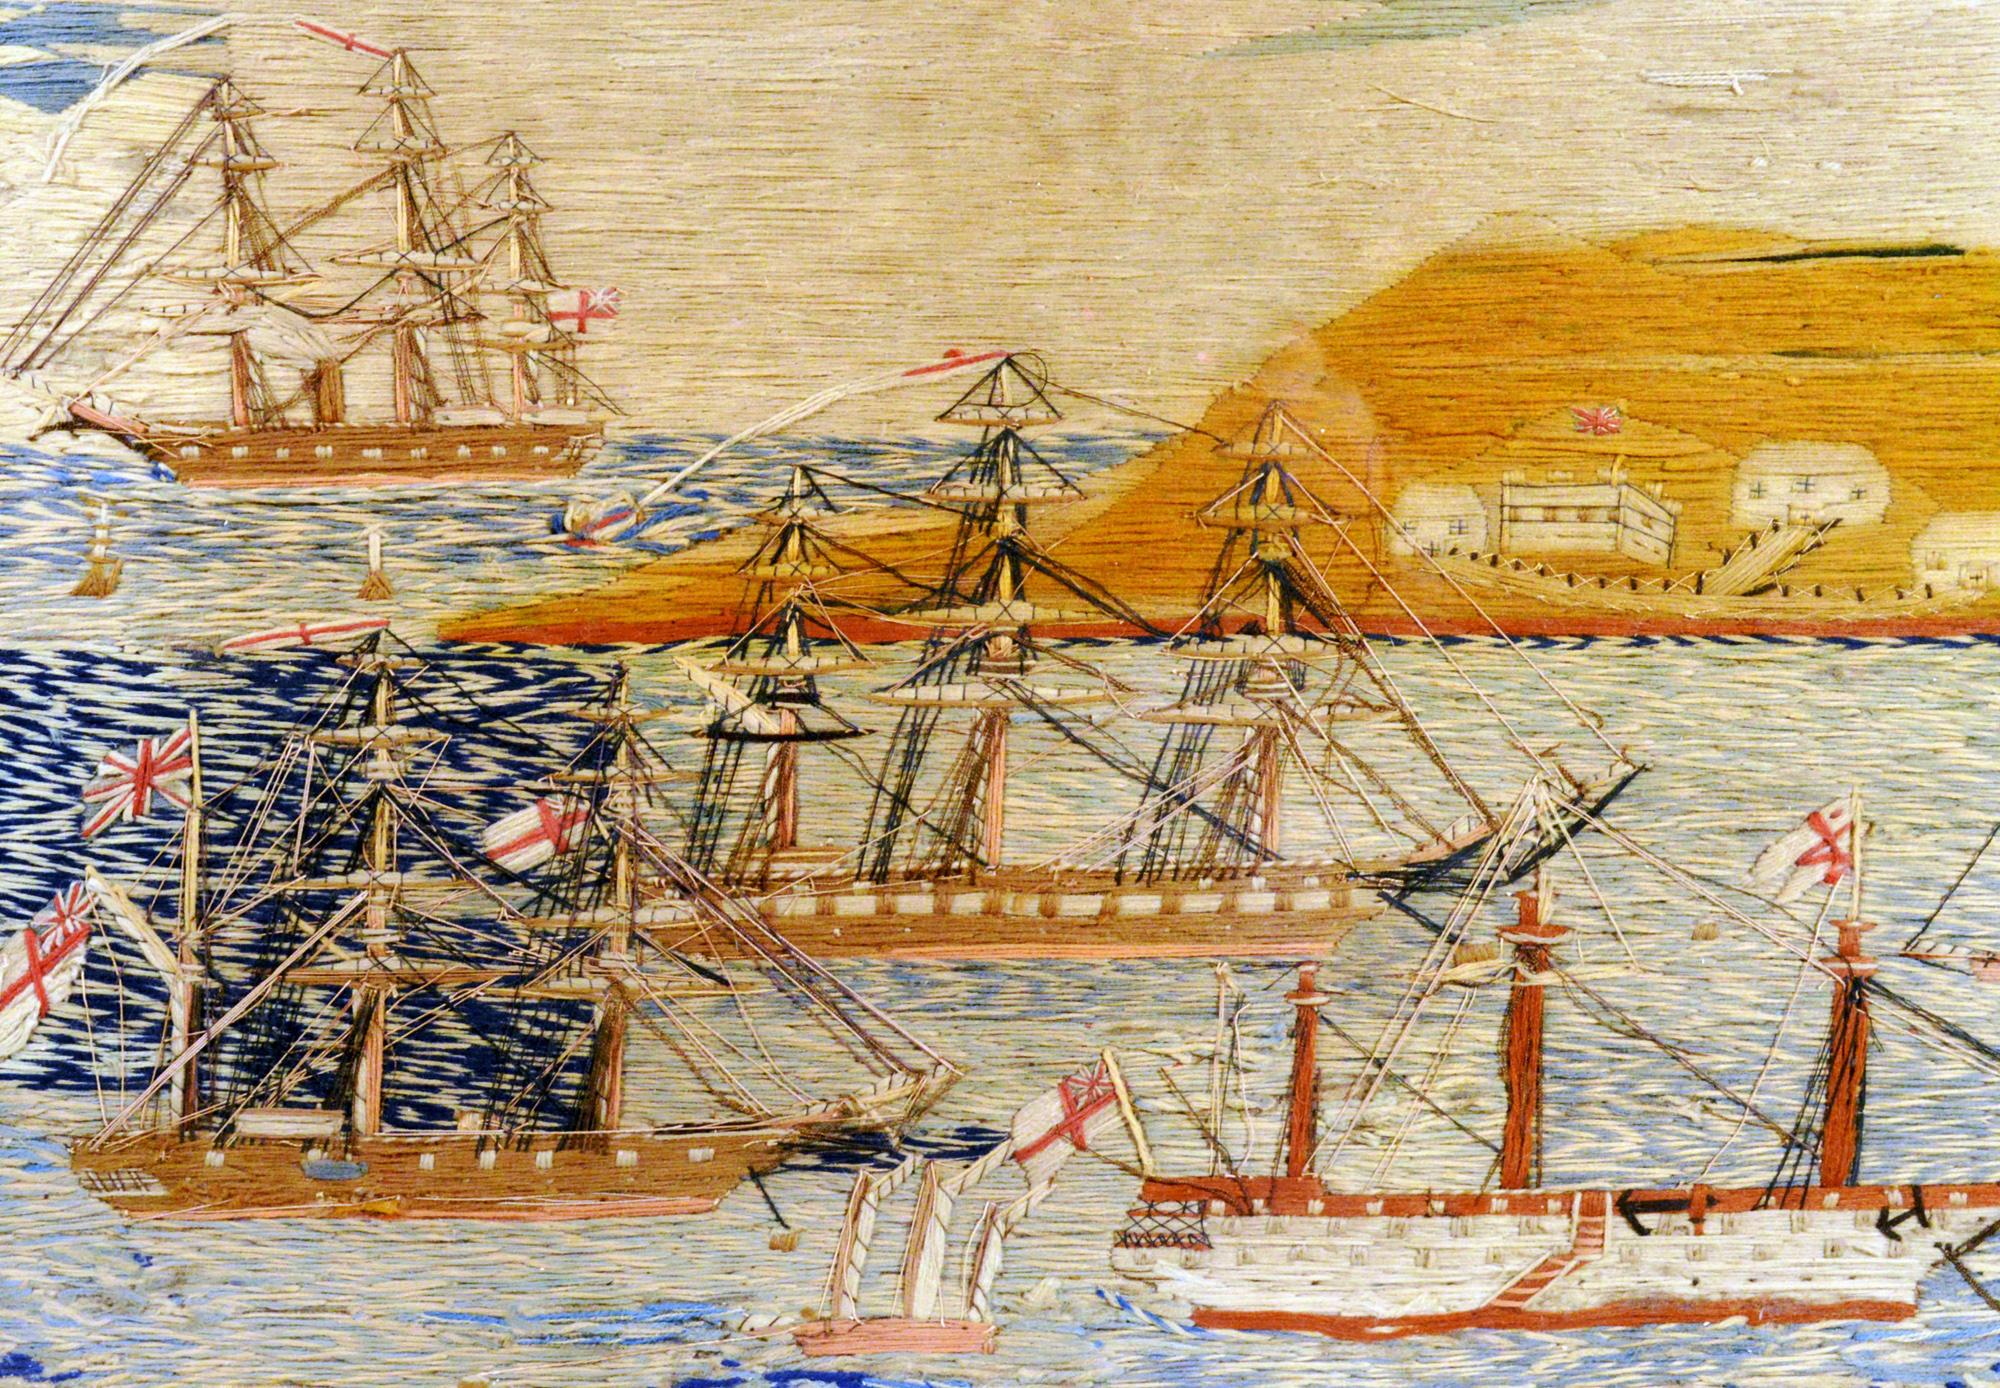 Victorian English Sailor's Woolwork or Woolie with Multiple Ships in a Bay